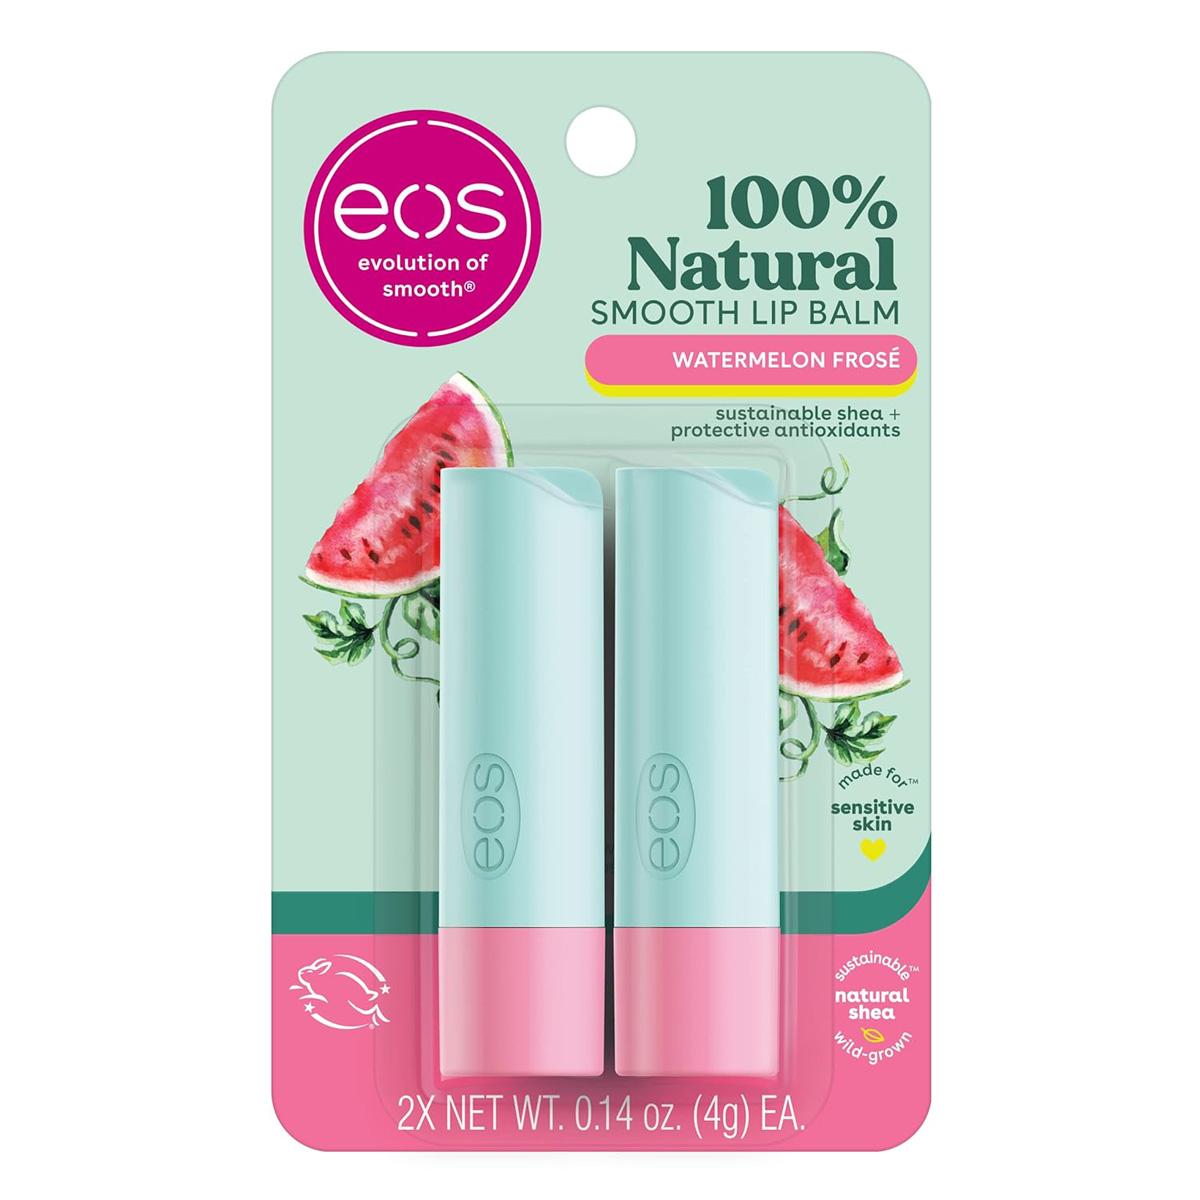 eos Natural Shea Lip Balm 3 Pack for $3.07